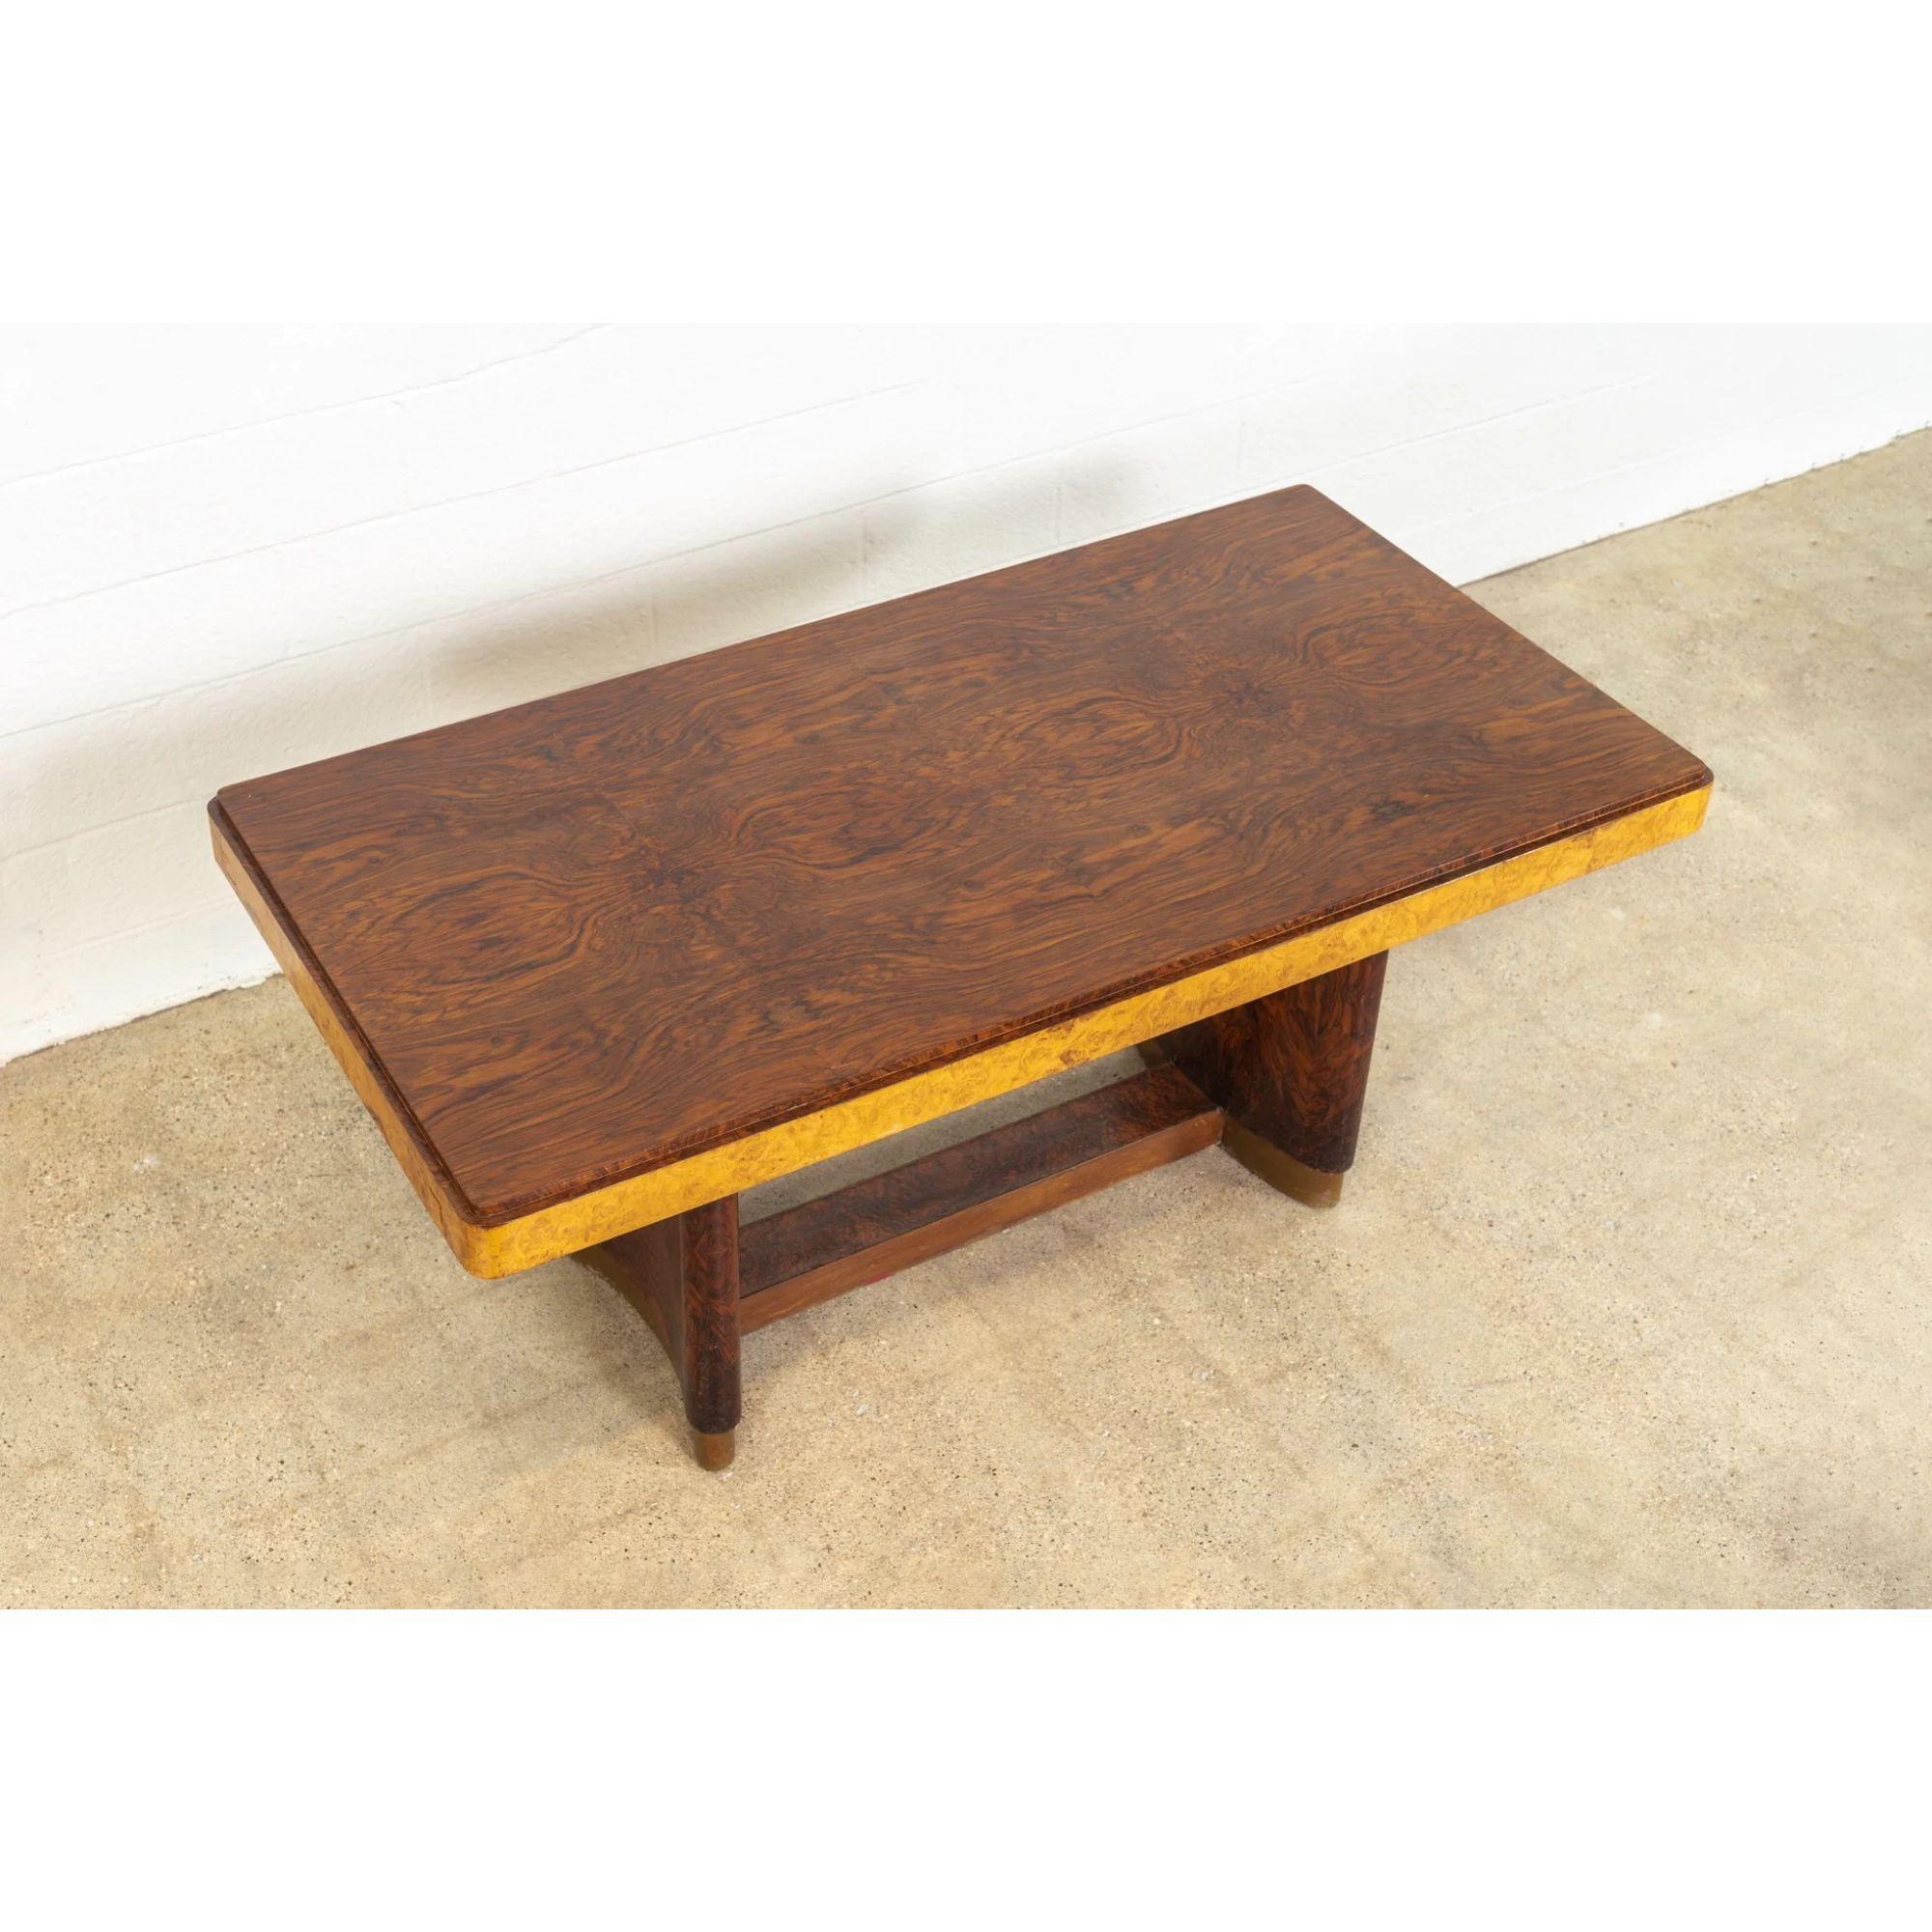 Antique Art Deco Burl Rosewood and Maple Dining Table, 1930s

This exceptional antique Art Deco dining table circa 1930 features a streamlined, unadorned geometric design expertly crafted from rosewood burl wood and birdseye maple with stunning